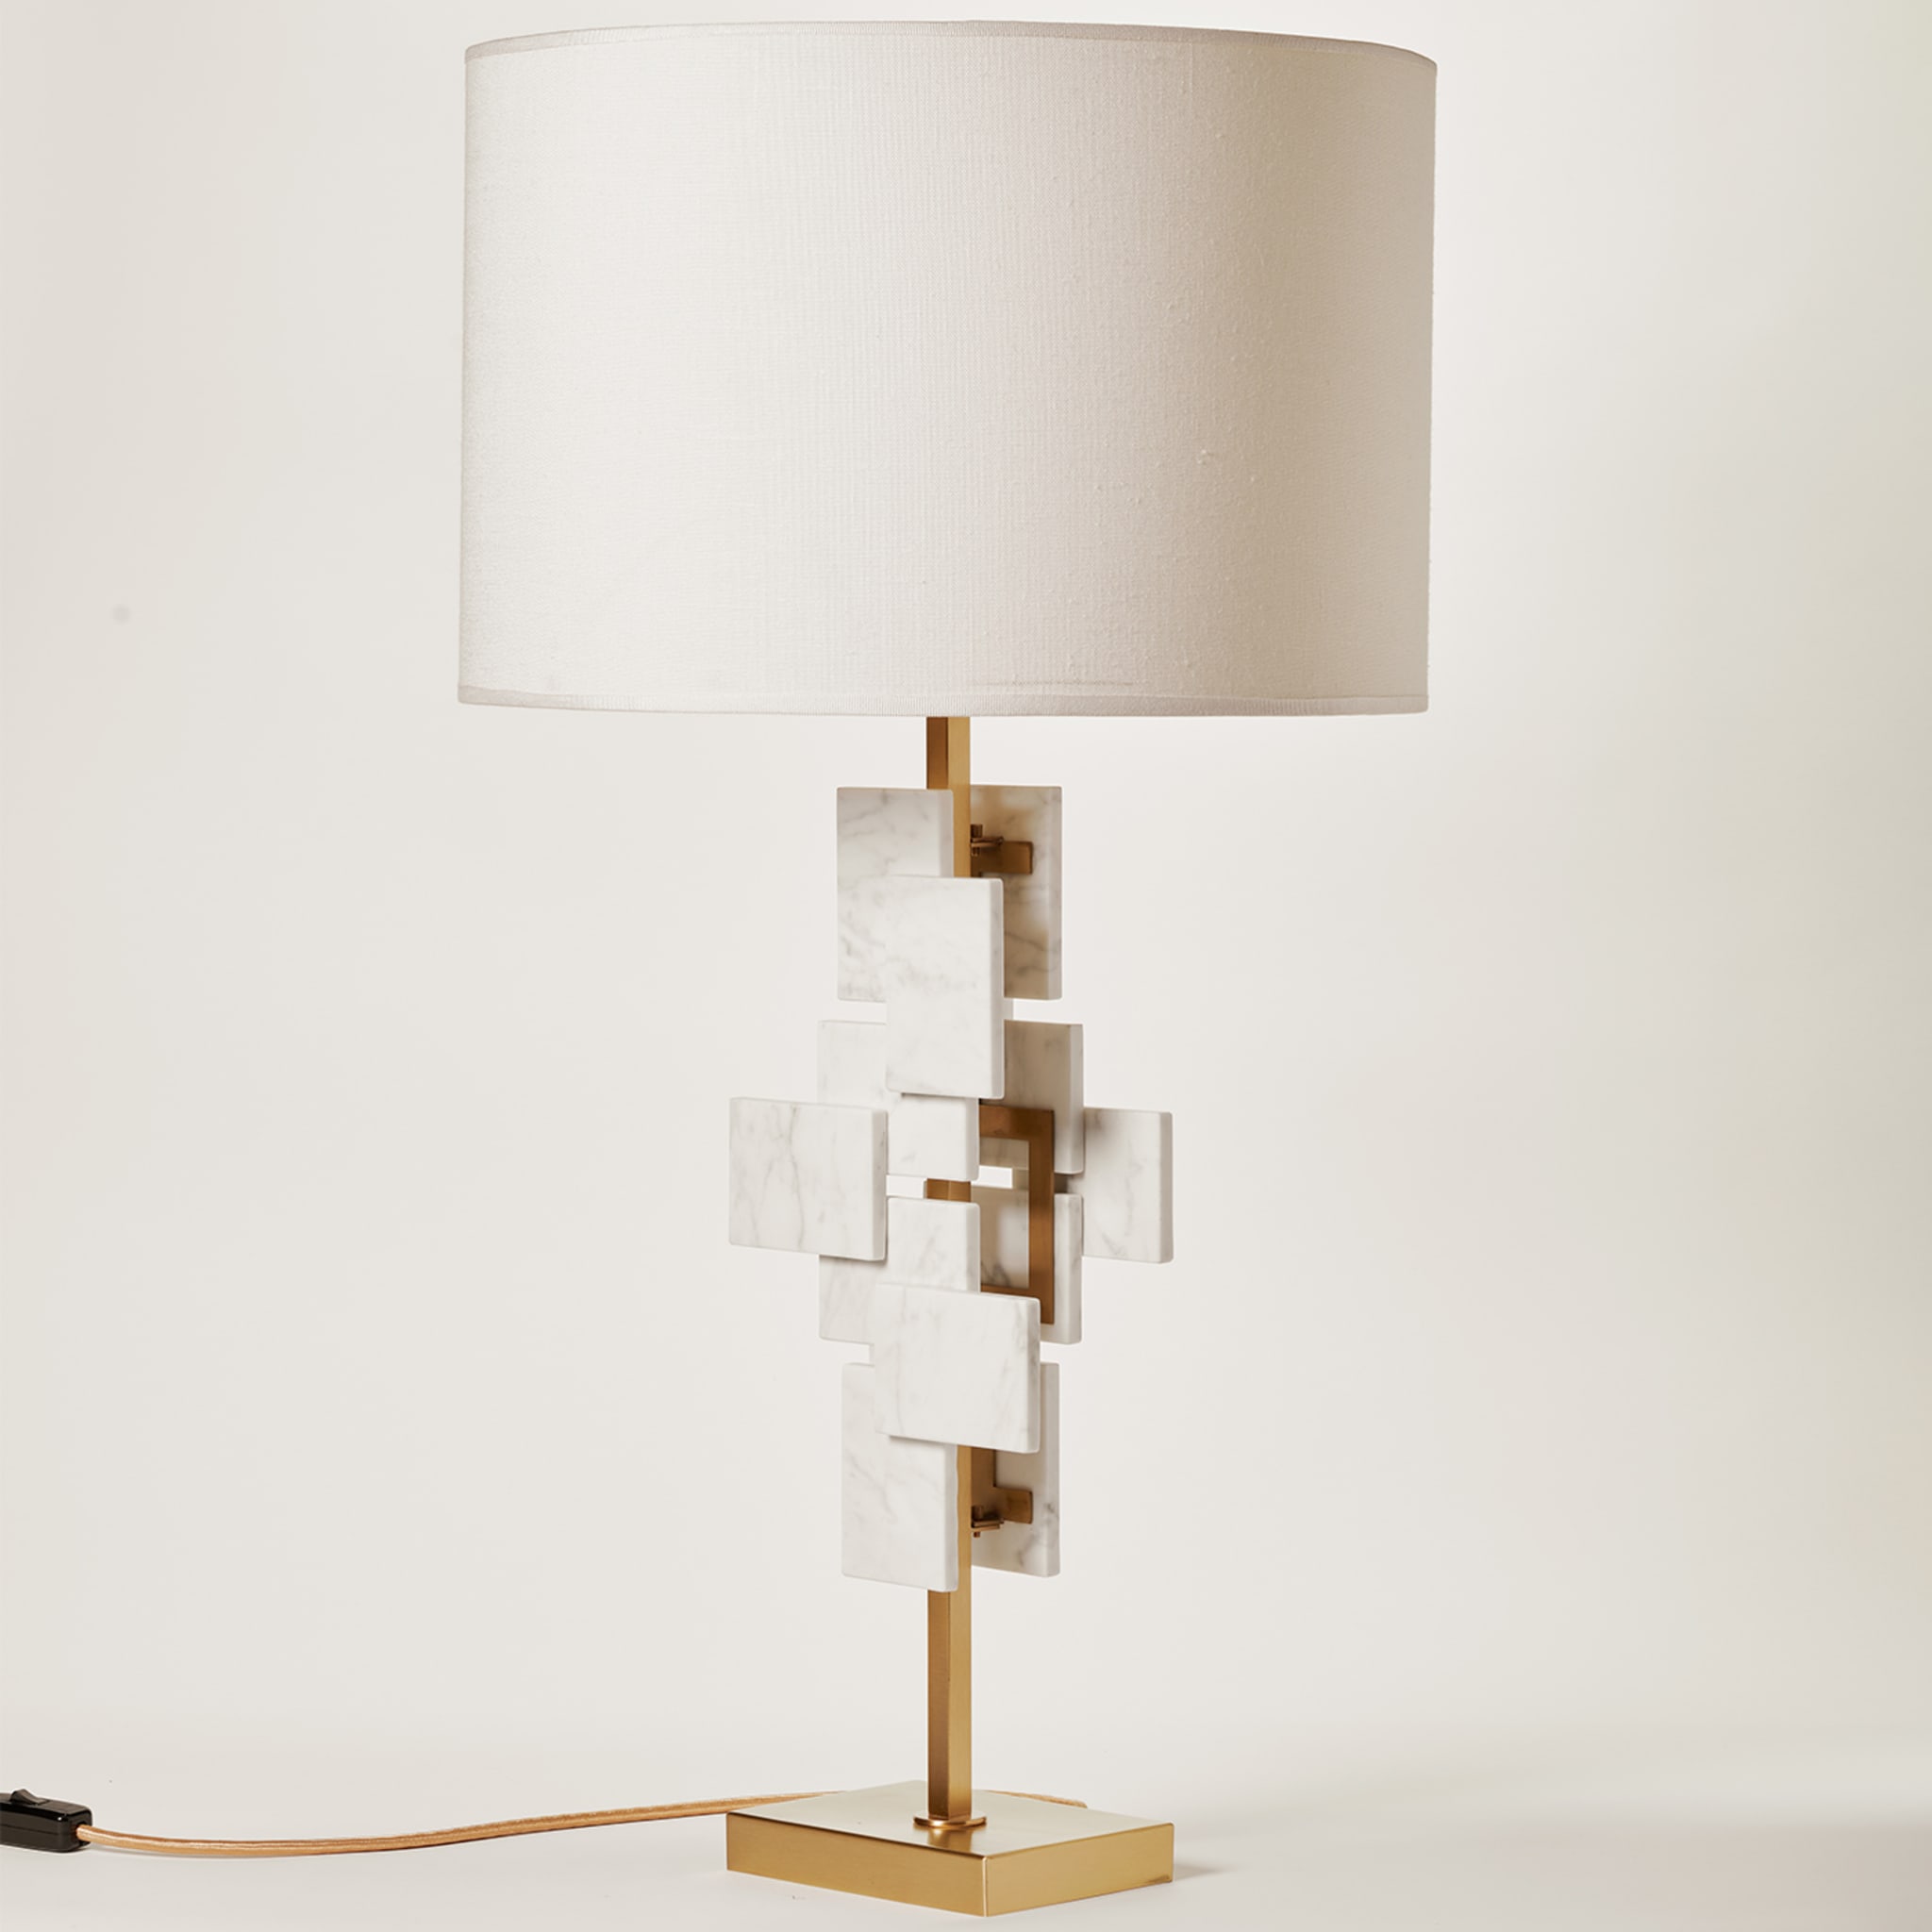 "Tiles" Table Lamp in Carrara Marble and Satin Brass - Alternative view 2